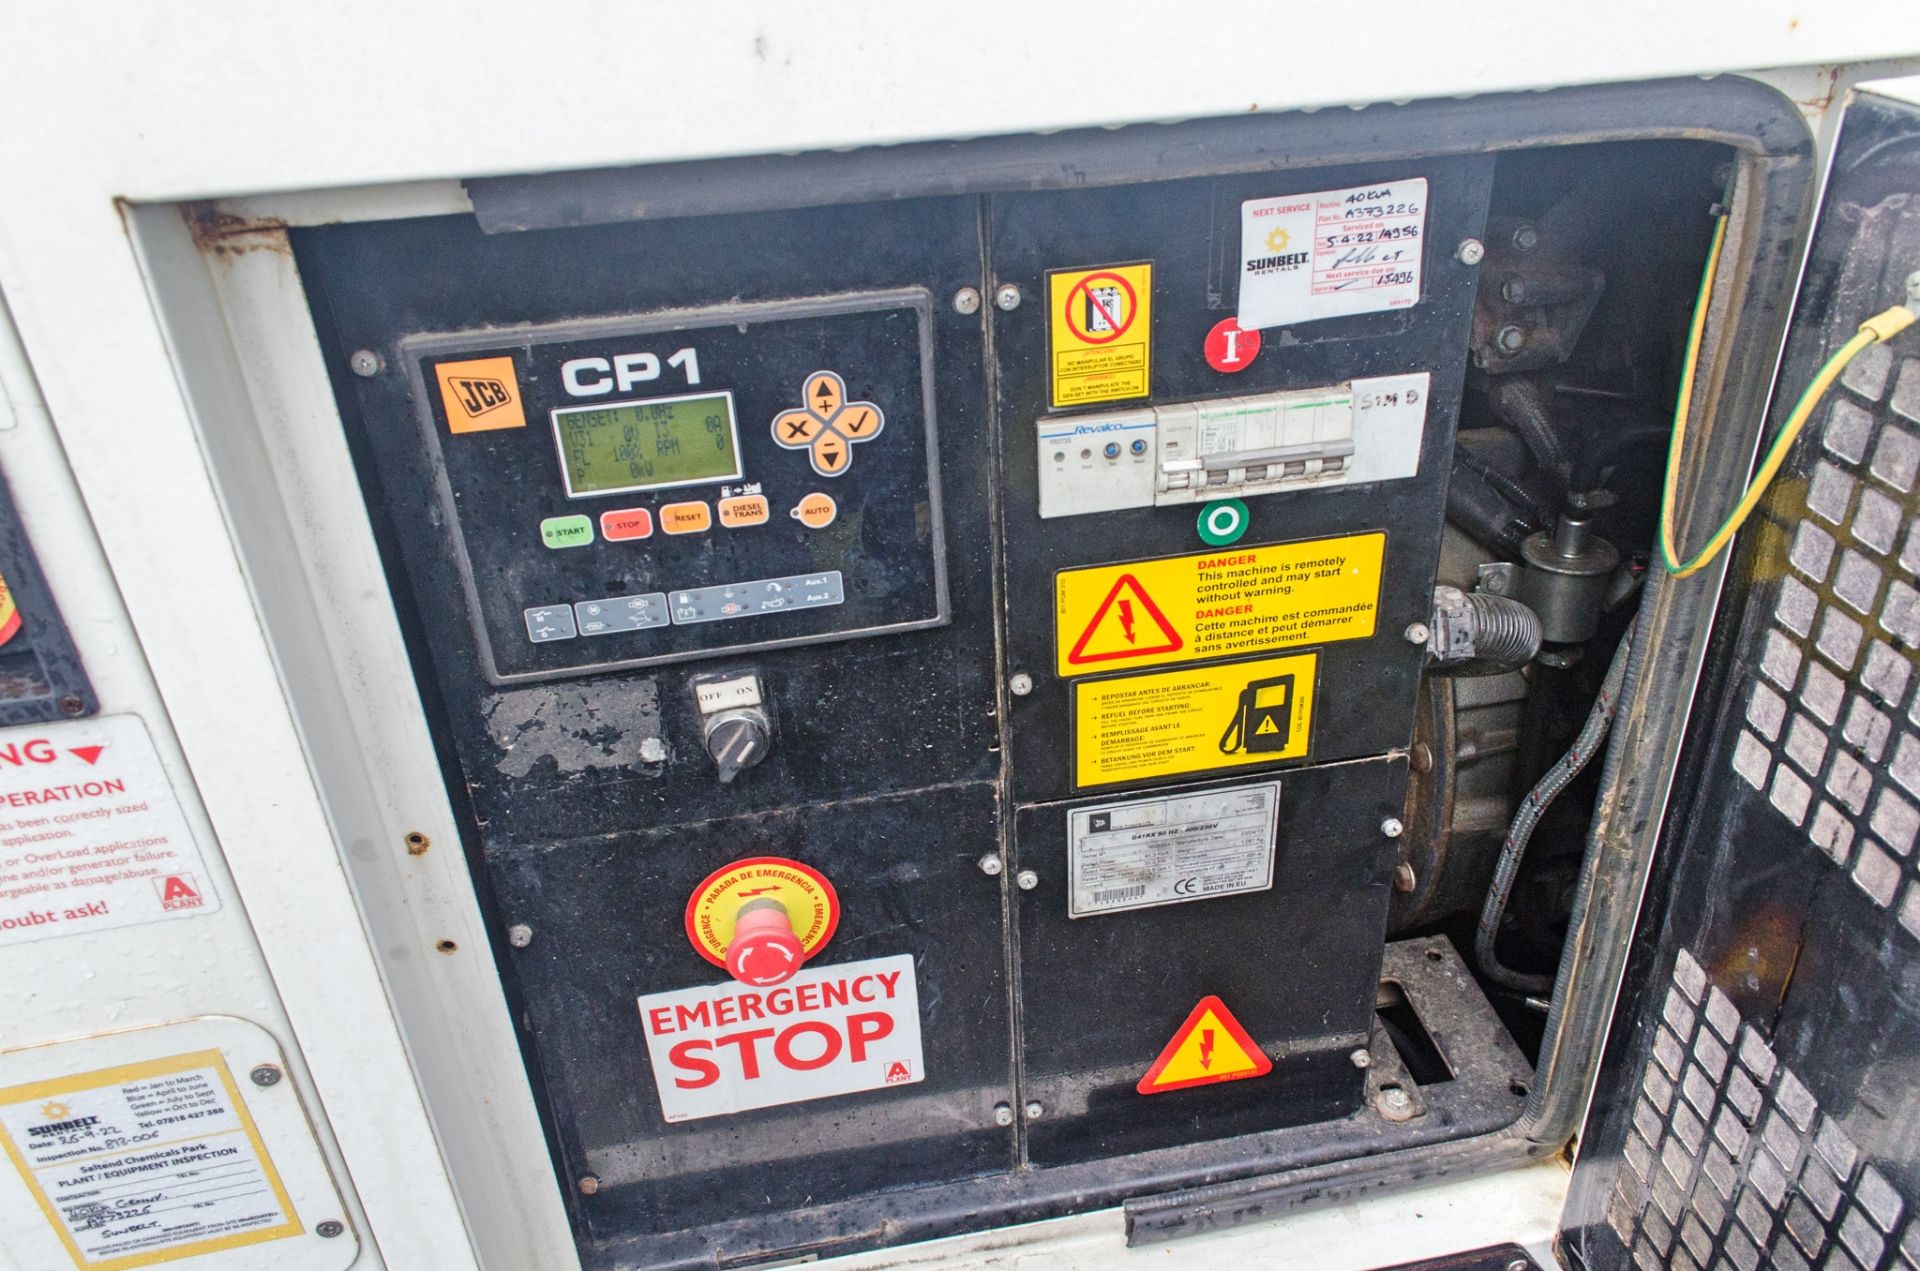 JCB G41RX 40 kva diesel driven generator Year: 2013 S/N: 1655204 Recorded Hours: 15,195 A373226 - Image 4 of 7